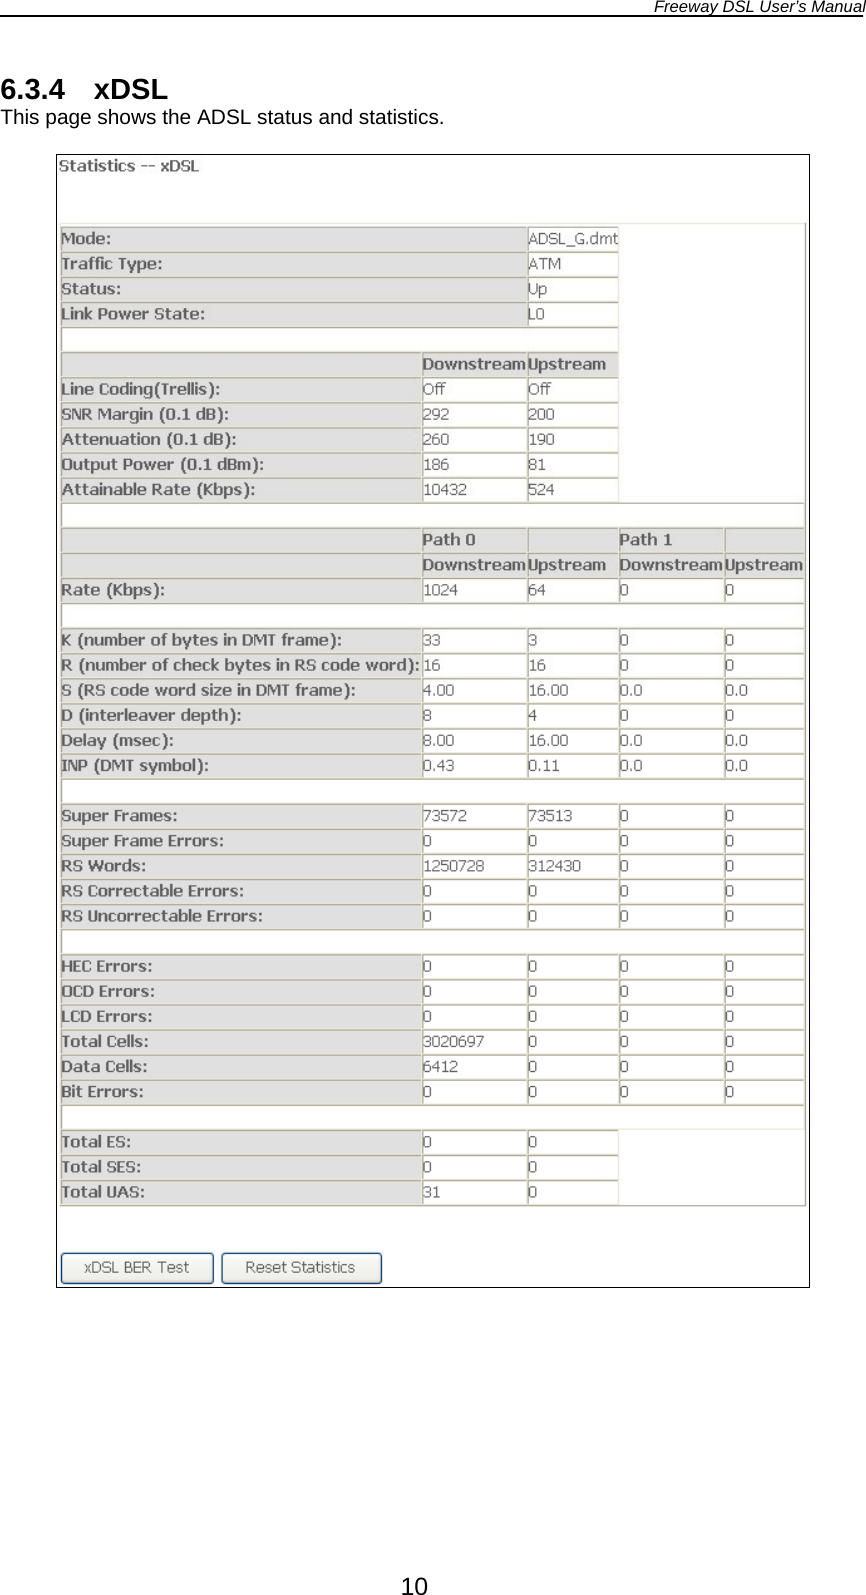 Freeway DSL User’s Manual  10 6.3.4 xDSL This page shows the ADSL status and statistics.    